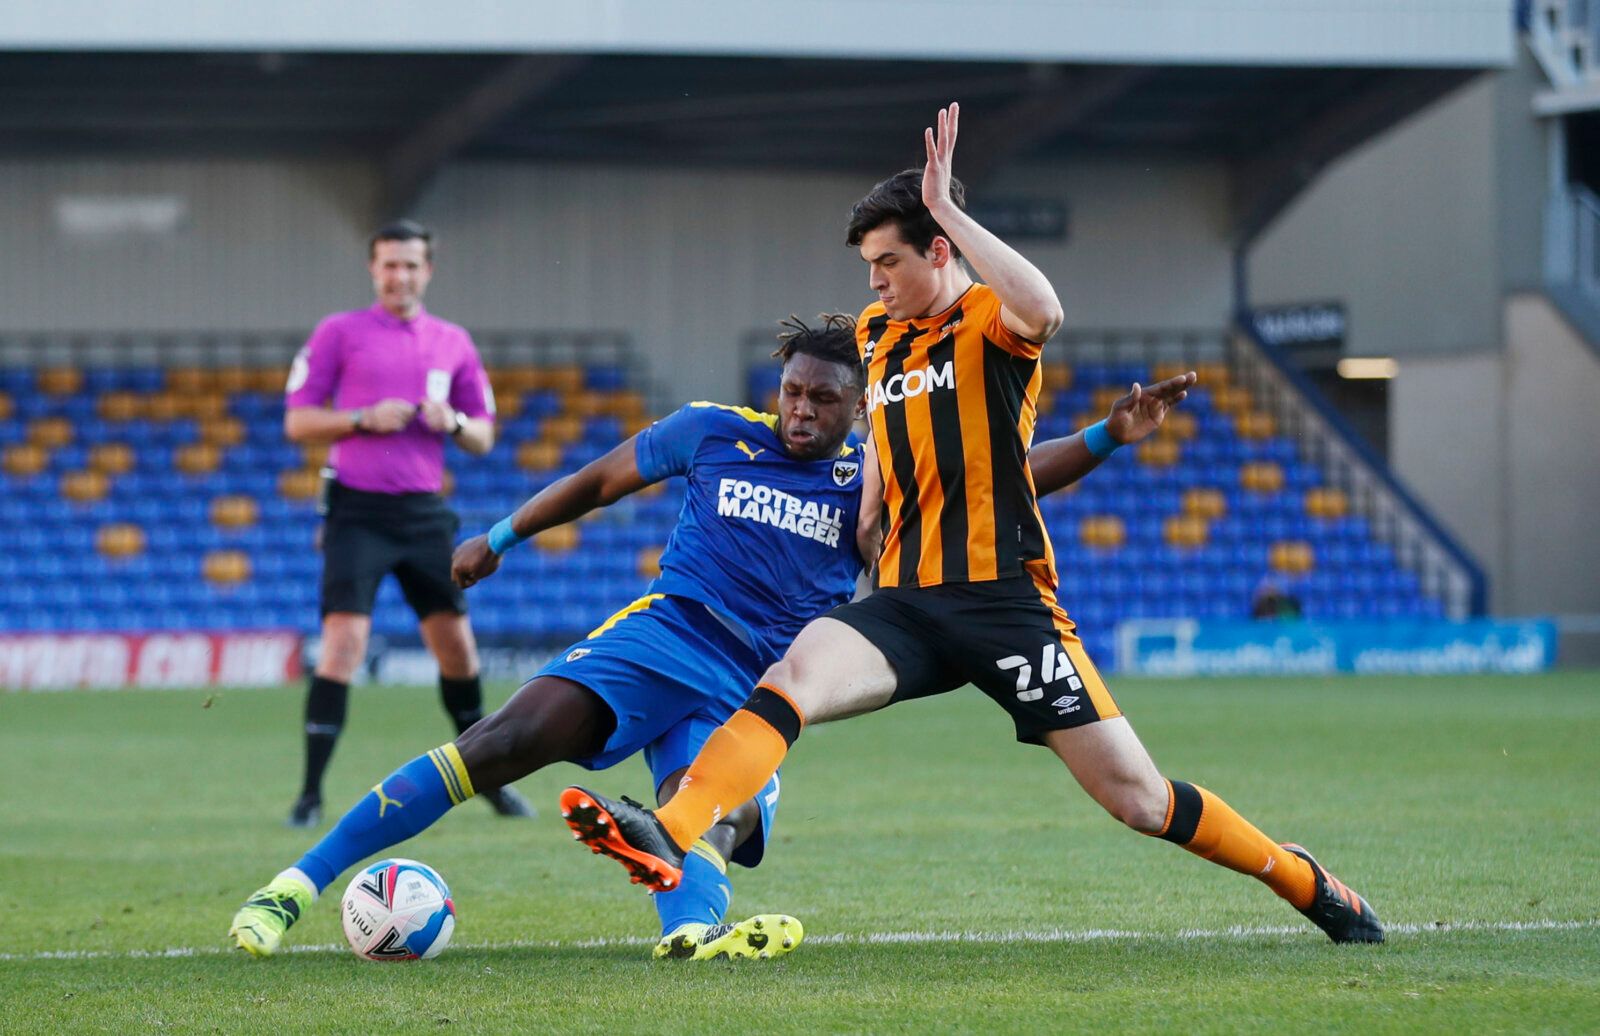 Soccer Football - League One - AFC Wimbledon v Hull City - Plough Lane, London, Britain - February 27, 2021 AFC Wimbledon’s Darnell Johnson in action with Hull’s Jacob Greaves Action Images/Matthew Childs EDITORIAL USE ONLY. No use with unauthorized audio, video, data, fixture lists, club/league logos or 'live' services. Online in-match use limited to 75 images, no video emulation. No use in betting, games or single club /league/player publications.  Please contact your account representative fo